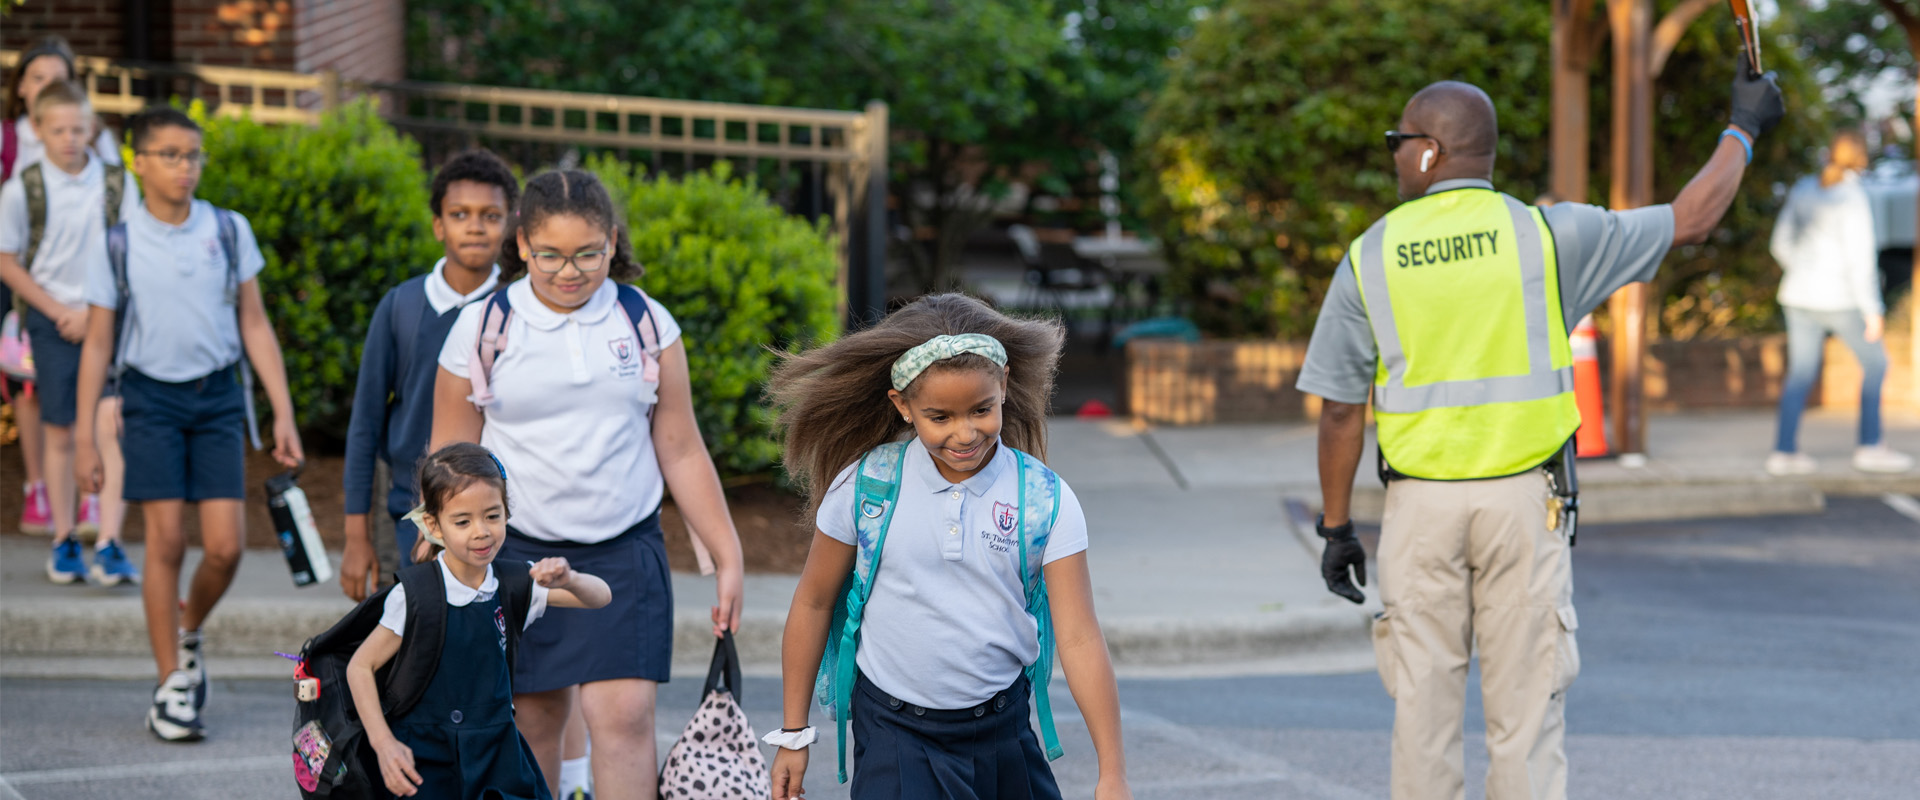 St. Timothy's students crossing the street to campus